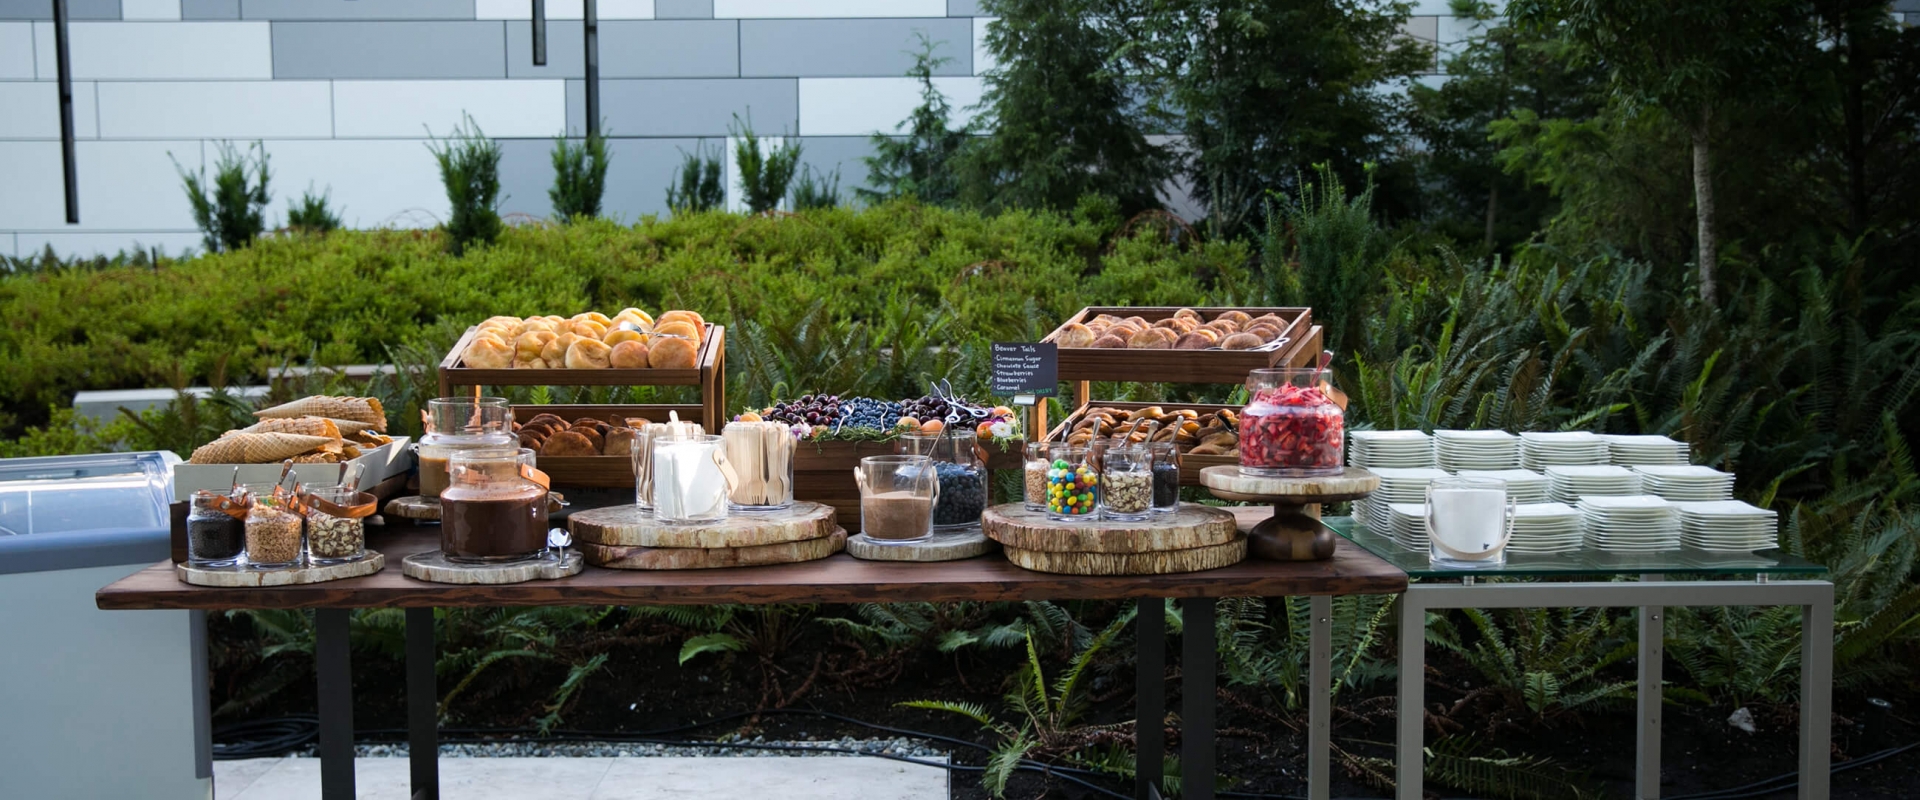 assortment of desserts & snacks on a long table at Parq Vancouver